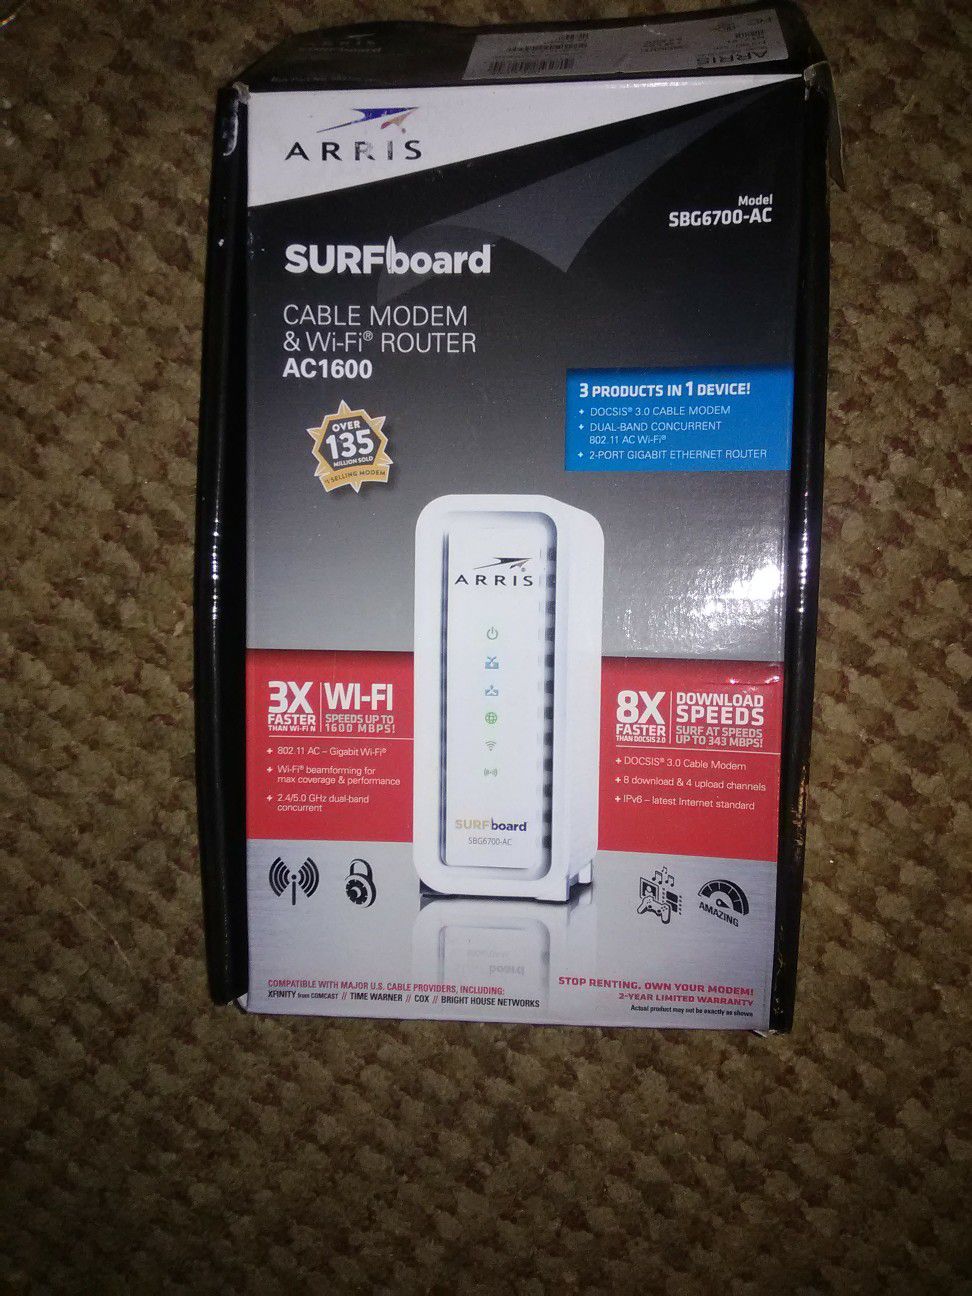 Arris surfboard cable modem and wifi router ac 1600